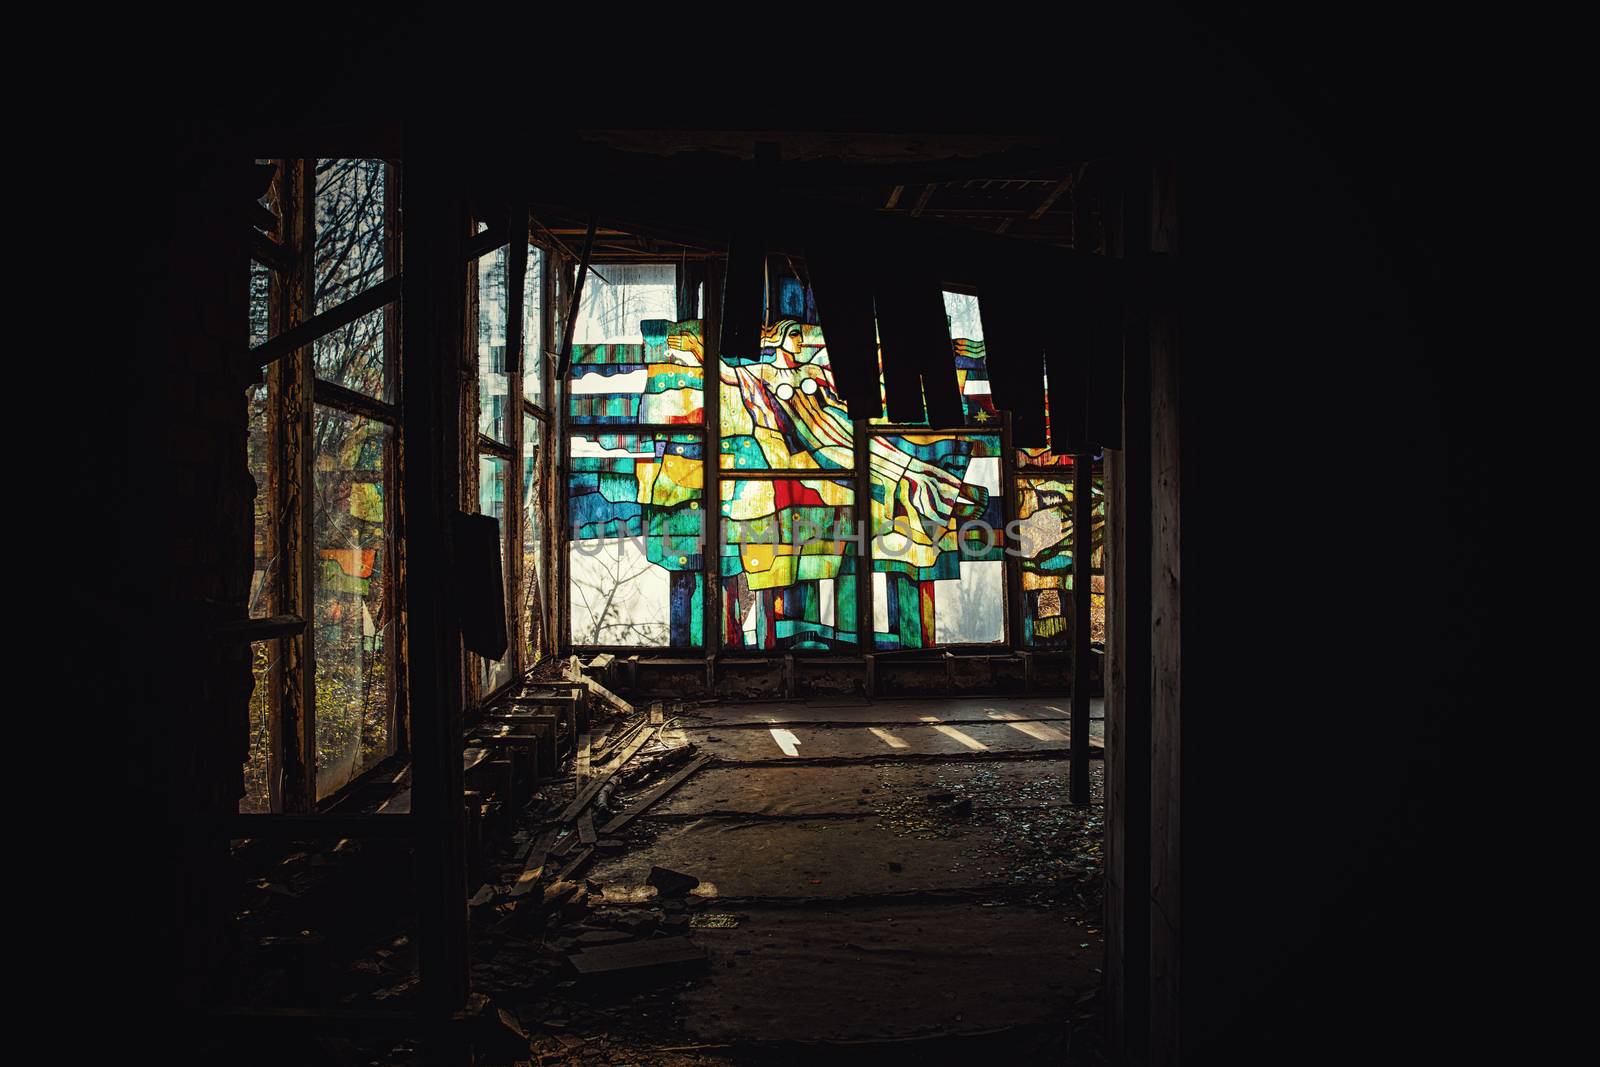 Large windows in Pripyat City, Chernobyl Exclusion Zone 2019 by svedoliver